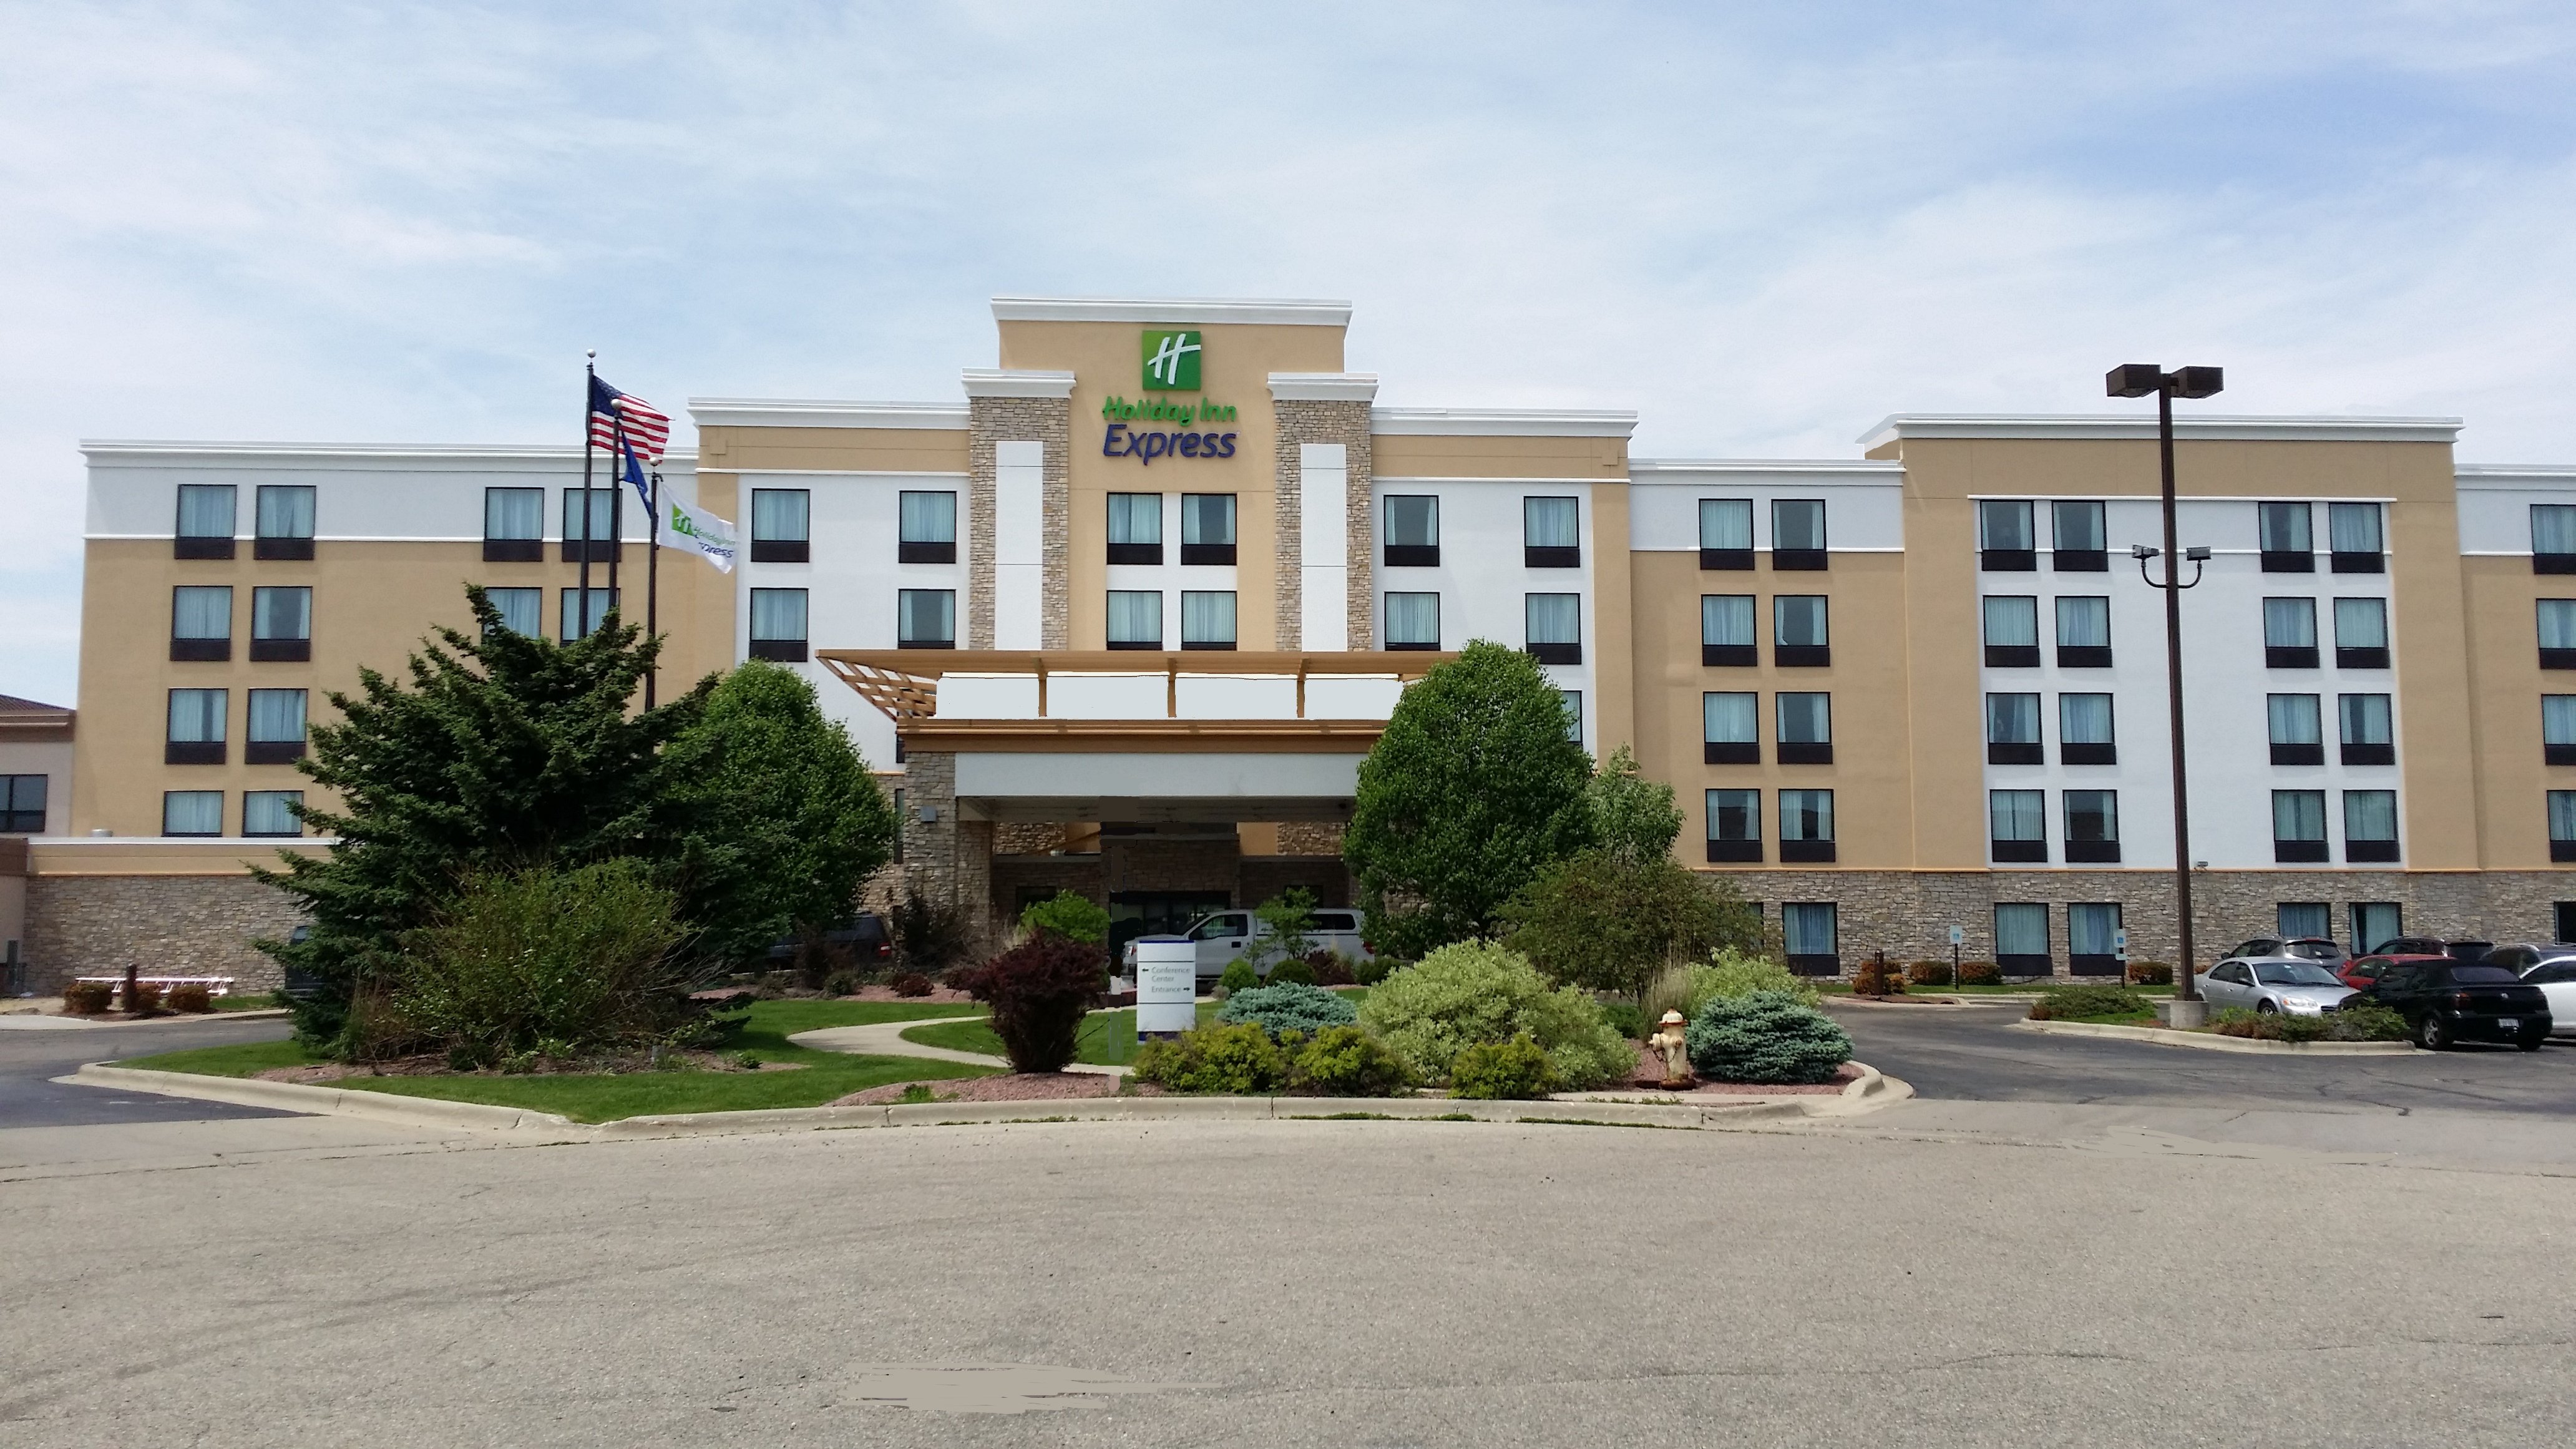 Welcome to the Holiday Inn Express Janesville, WI